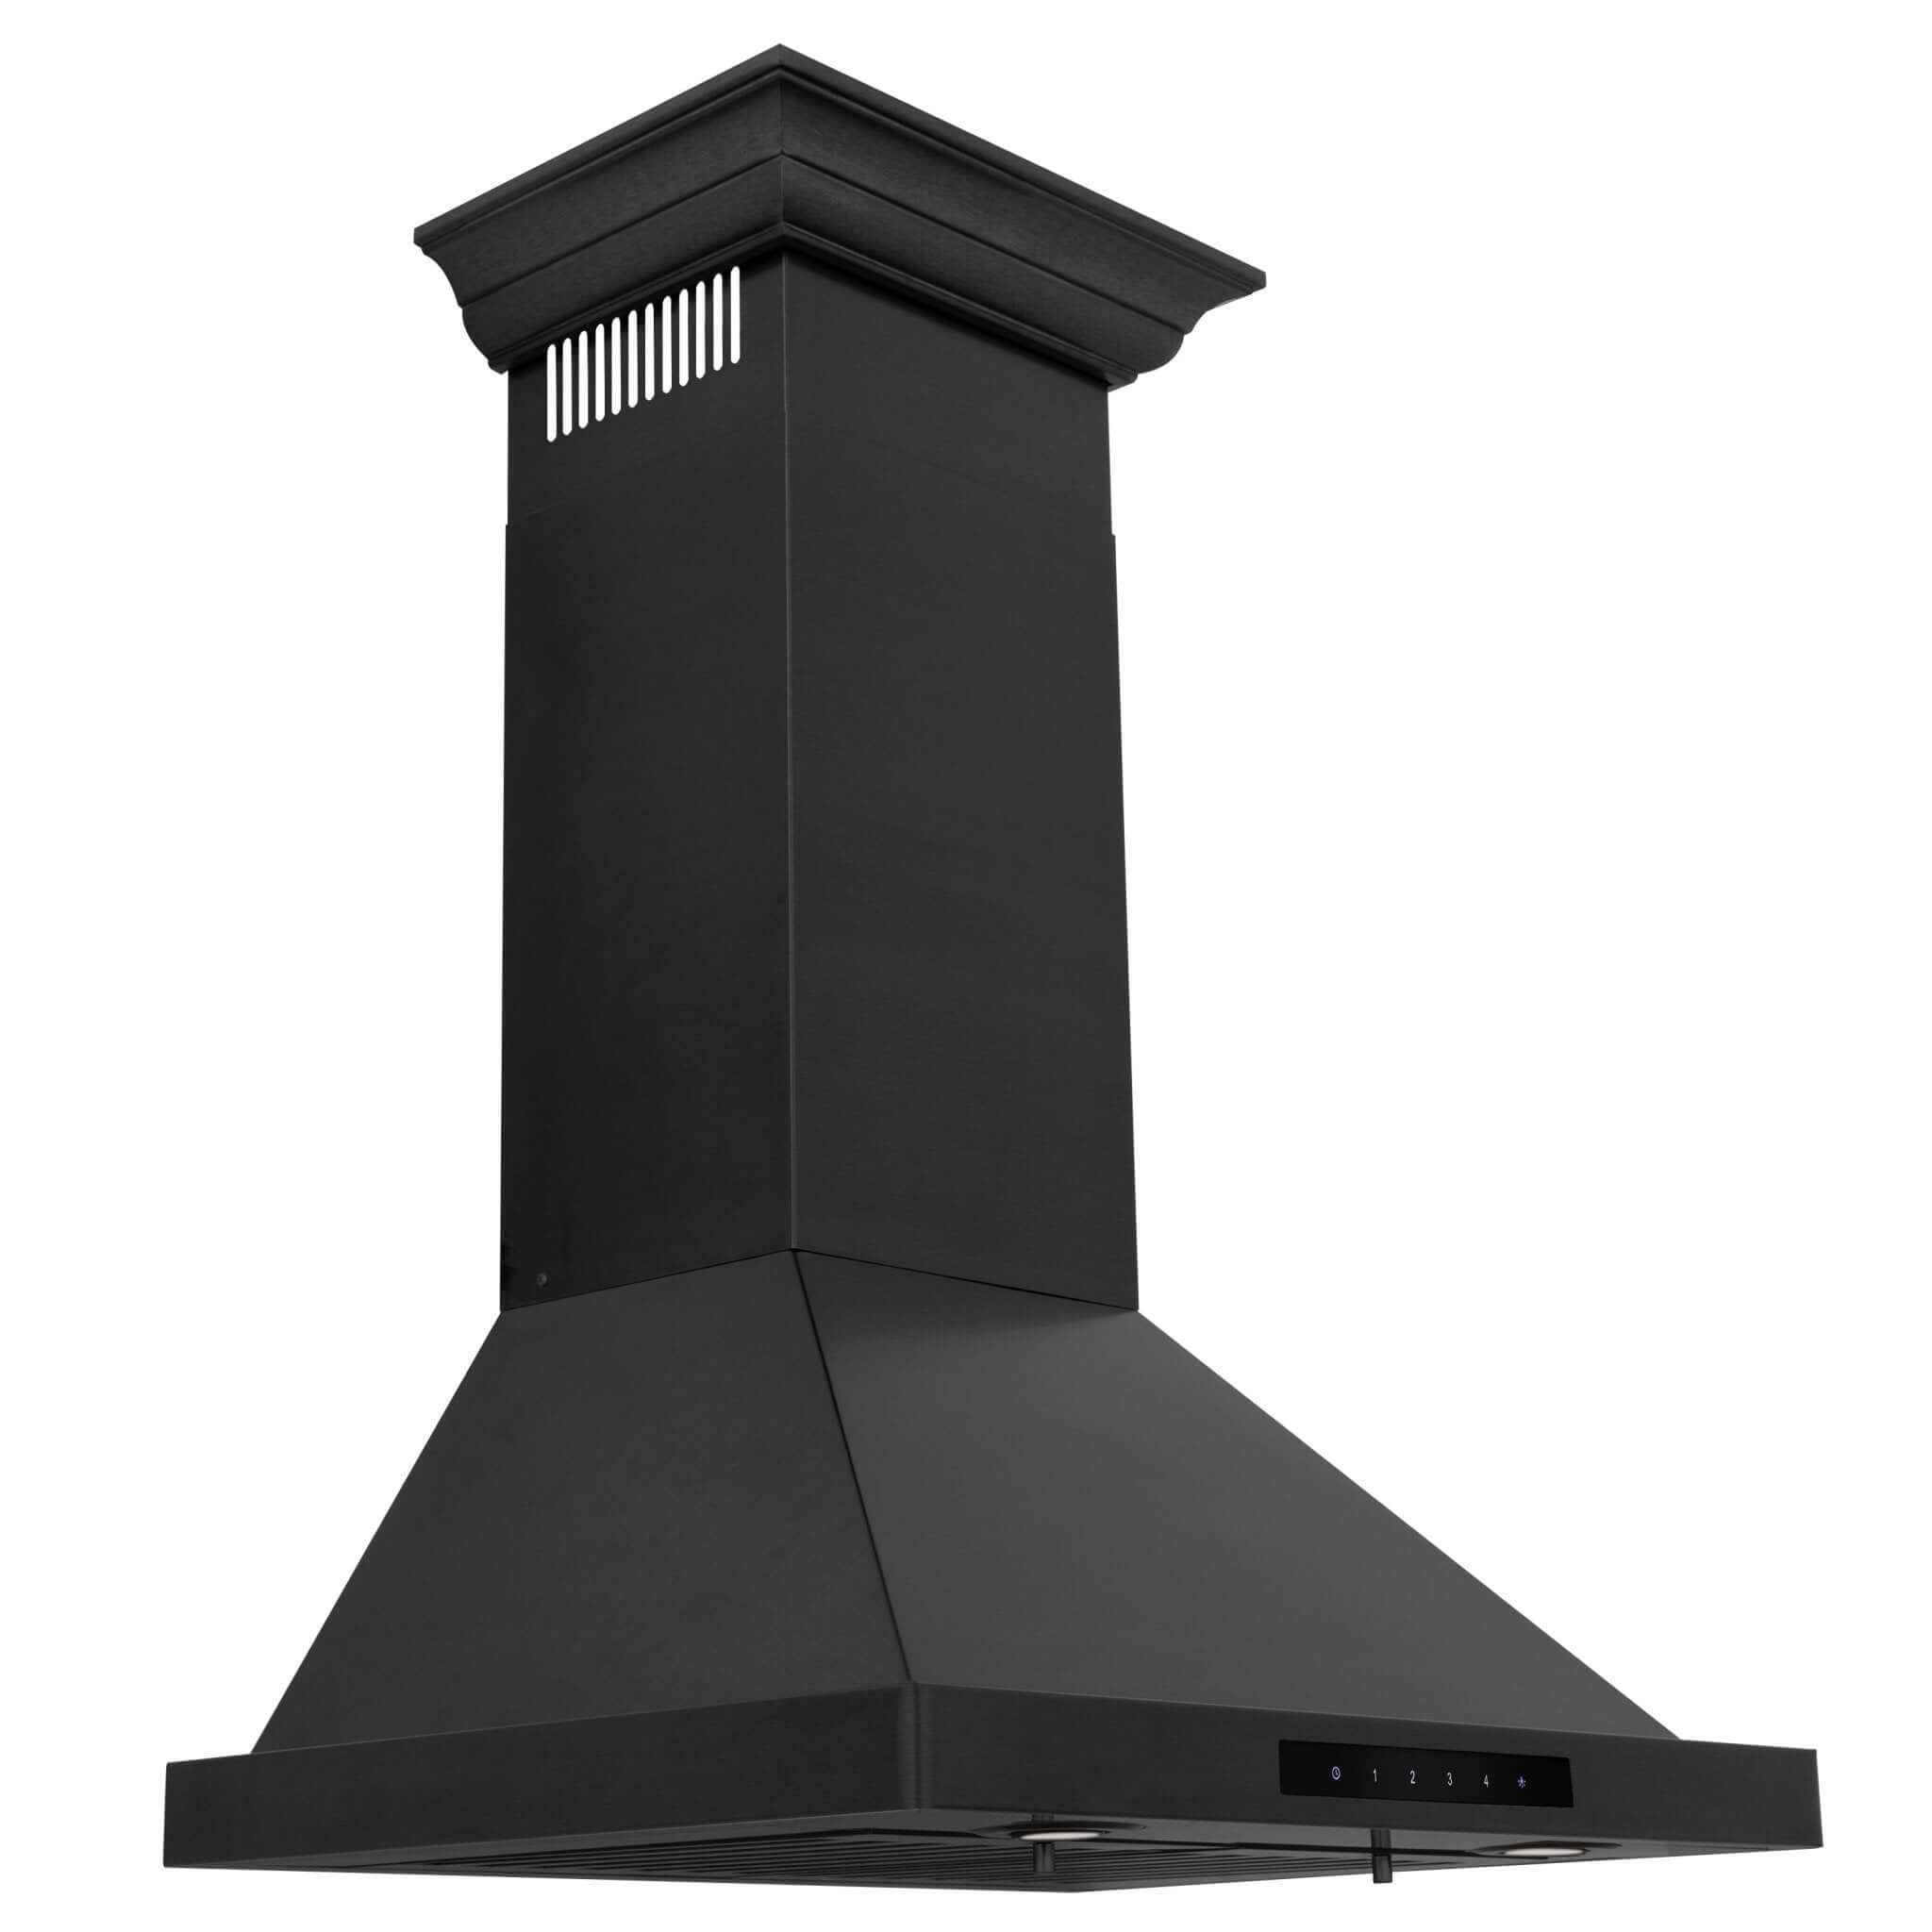 ZLINE 24" Convertible Vent Wall Mount Range Hood in Black Stainless Steel with Crown Molding (BSKBNCRN-24)